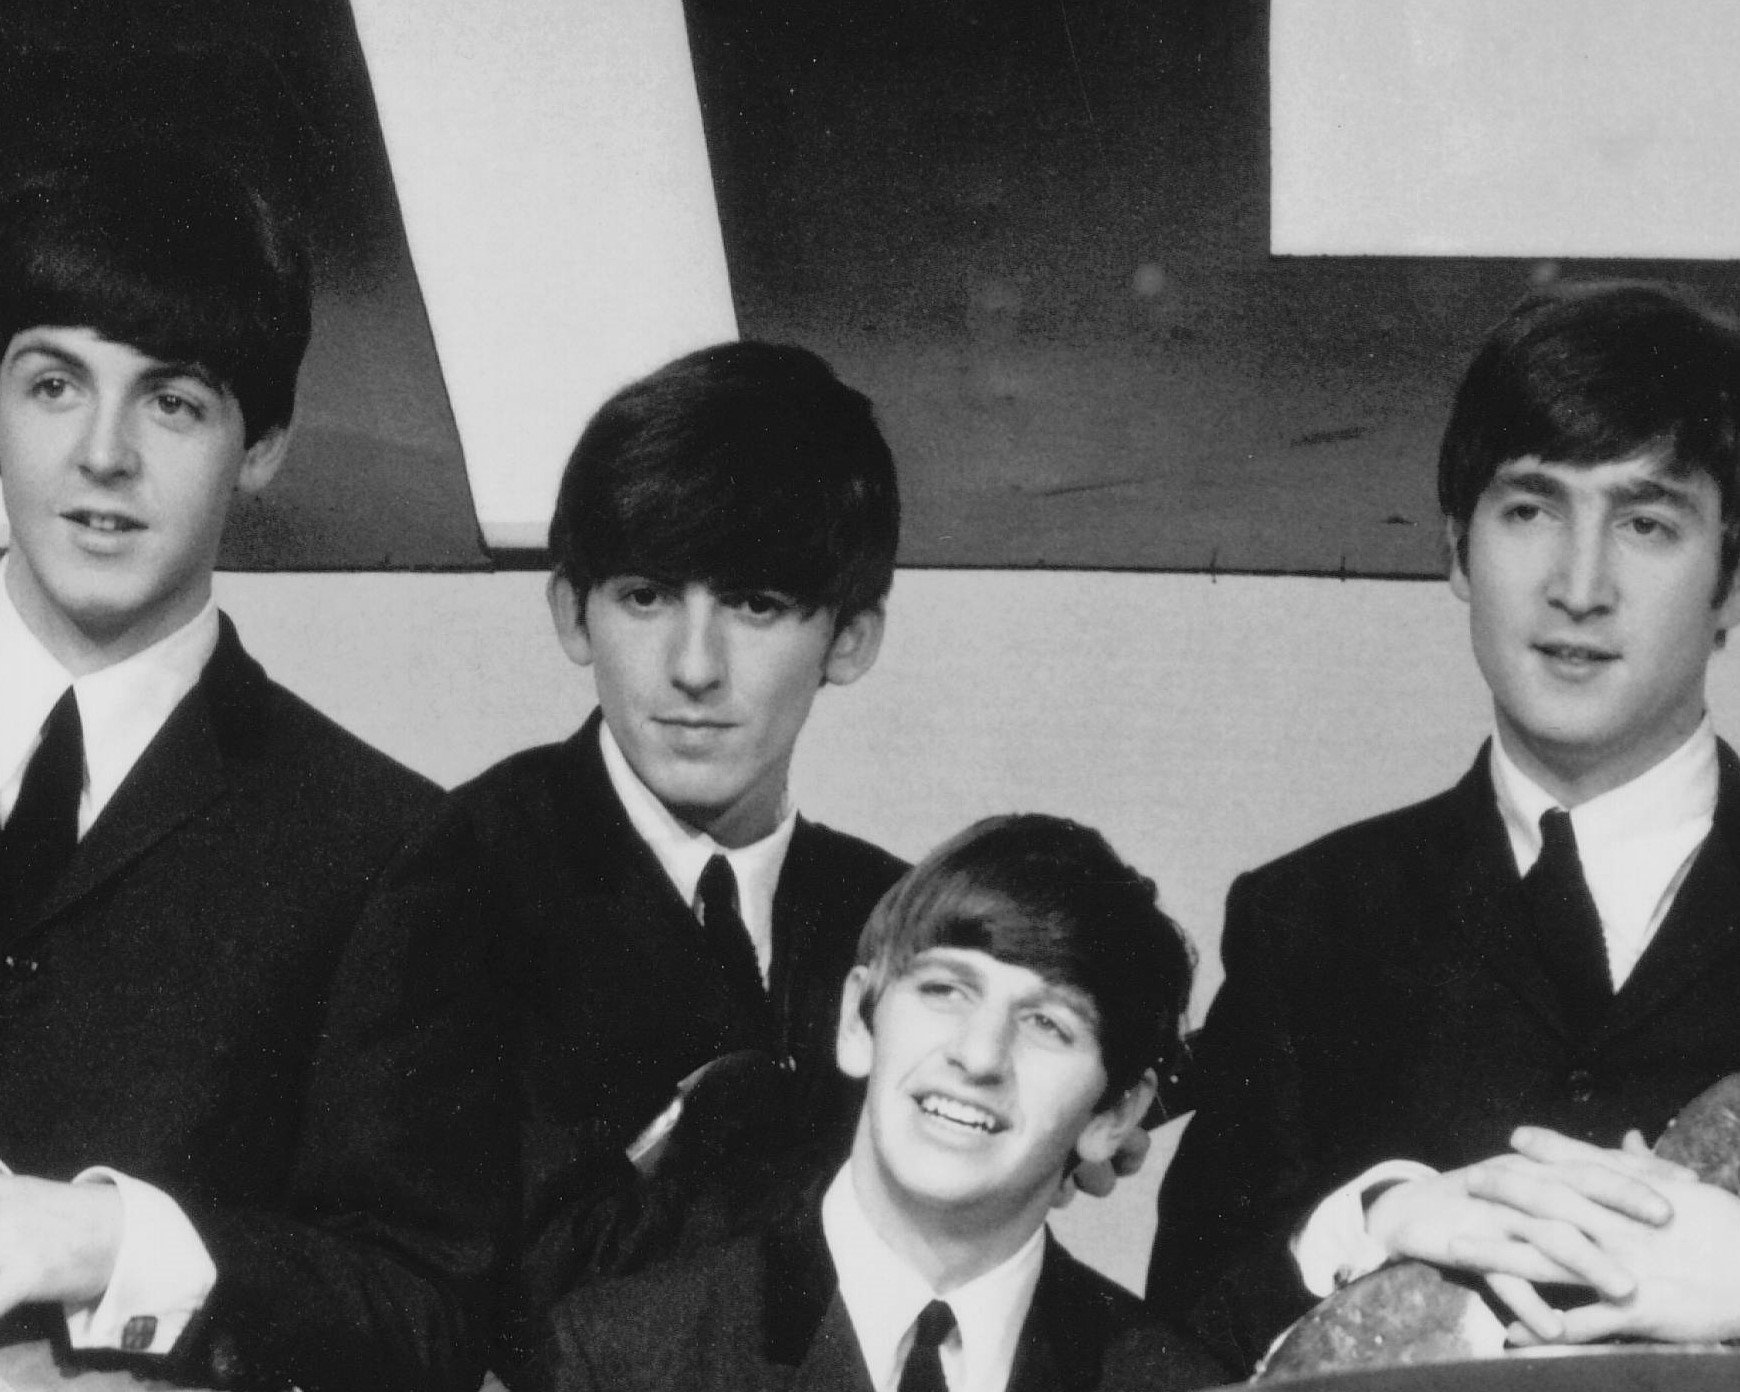 The Beatles in black-and-white